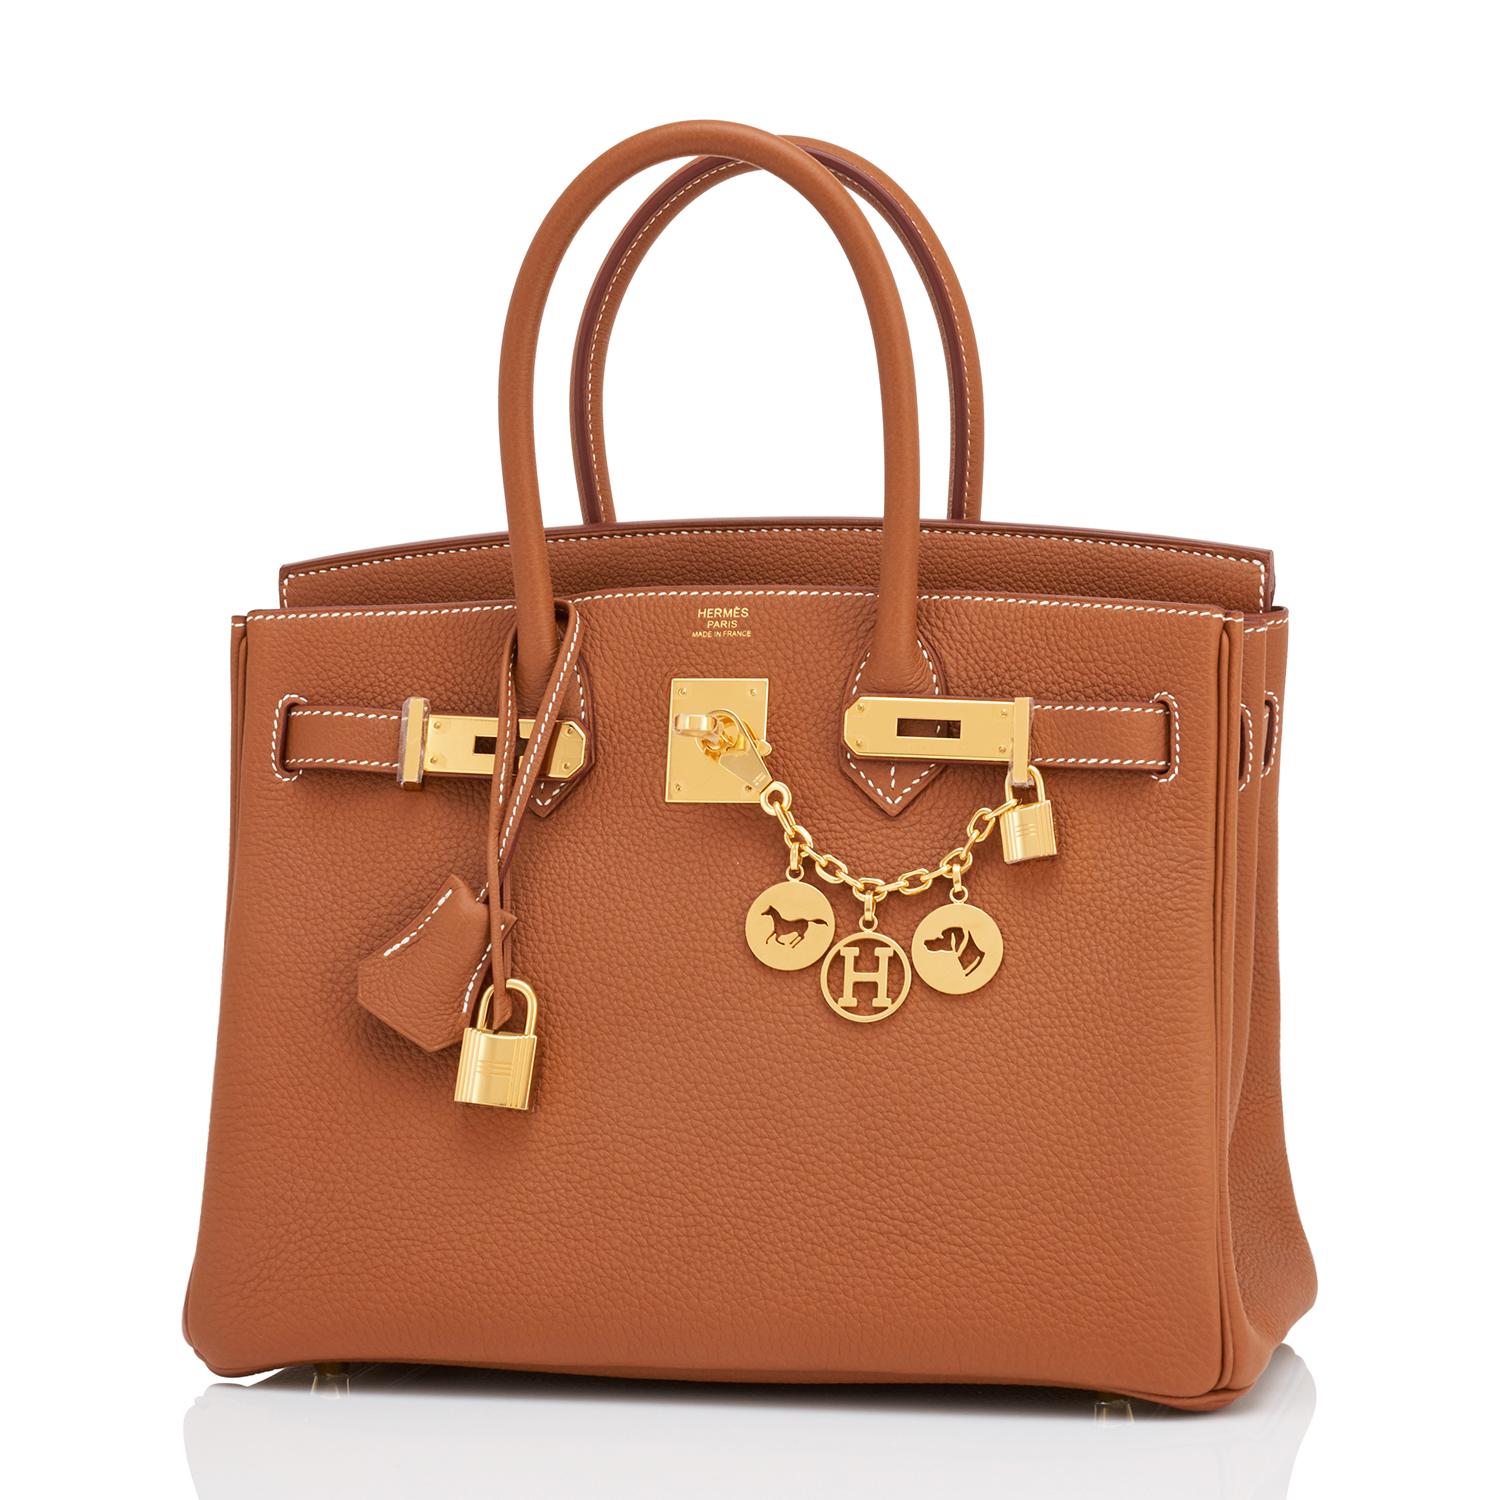 Hermes Birkin 30cm Gold Camel Tan Togo Gold Hardware Bag Z Stamp, 2021
Just purchased from Hermes store- bag bears new 2021 interior Z Stamp!
Brand New in Box. Store Fresh. Pristine Condition (with plastic on hardware). 
Perfect gift! Comes with